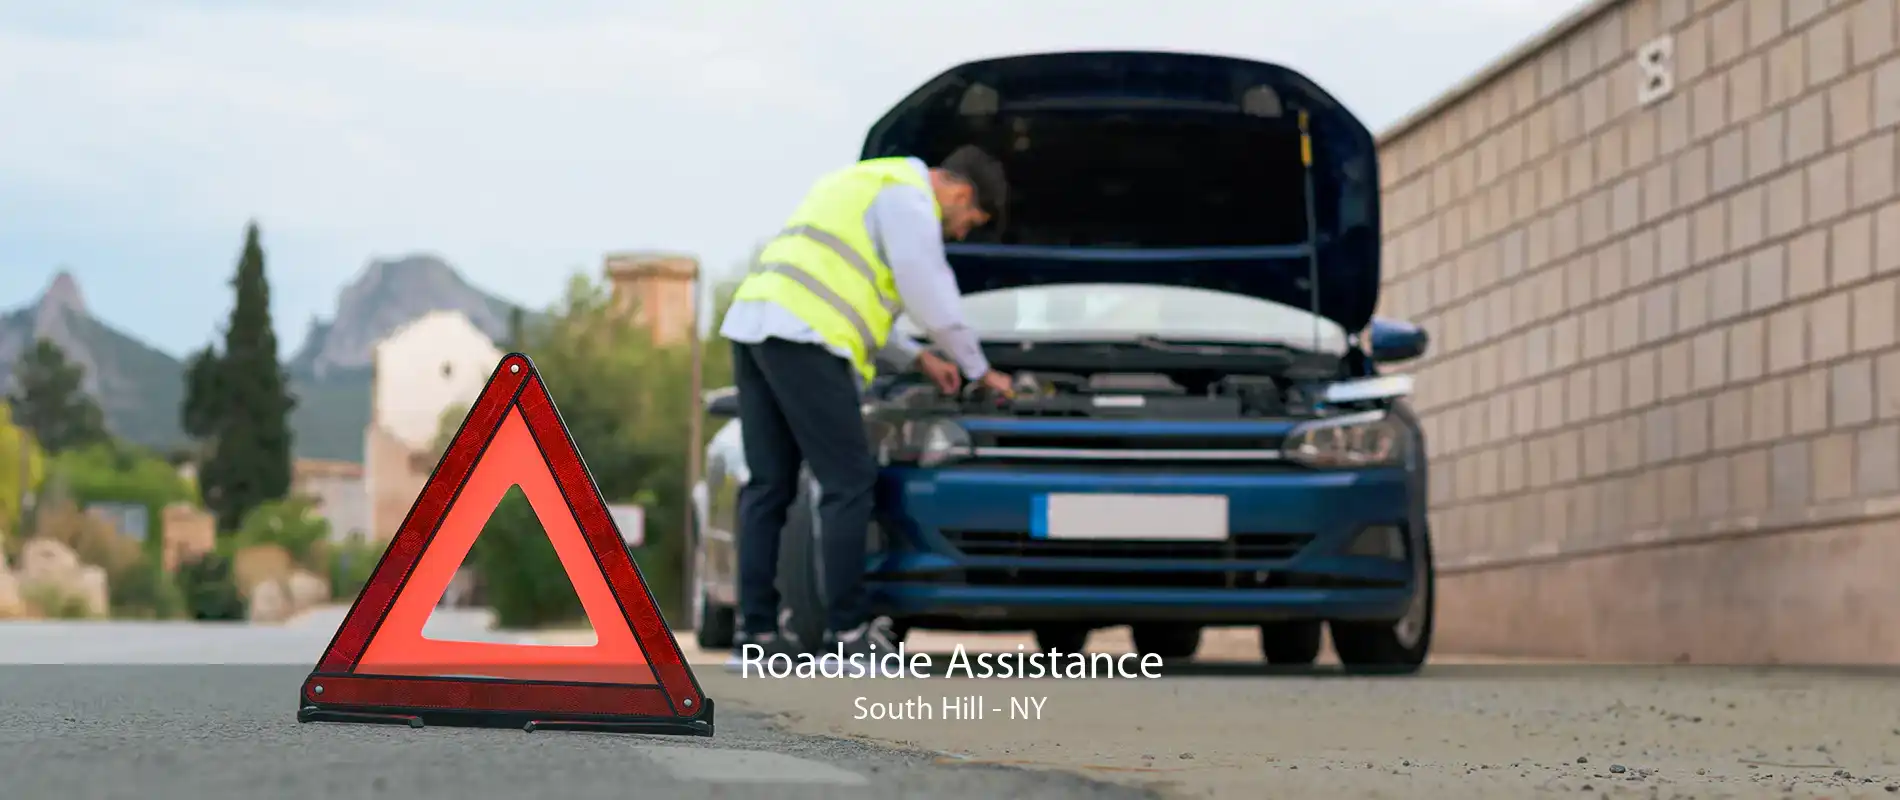 Roadside Assistance South Hill - NY